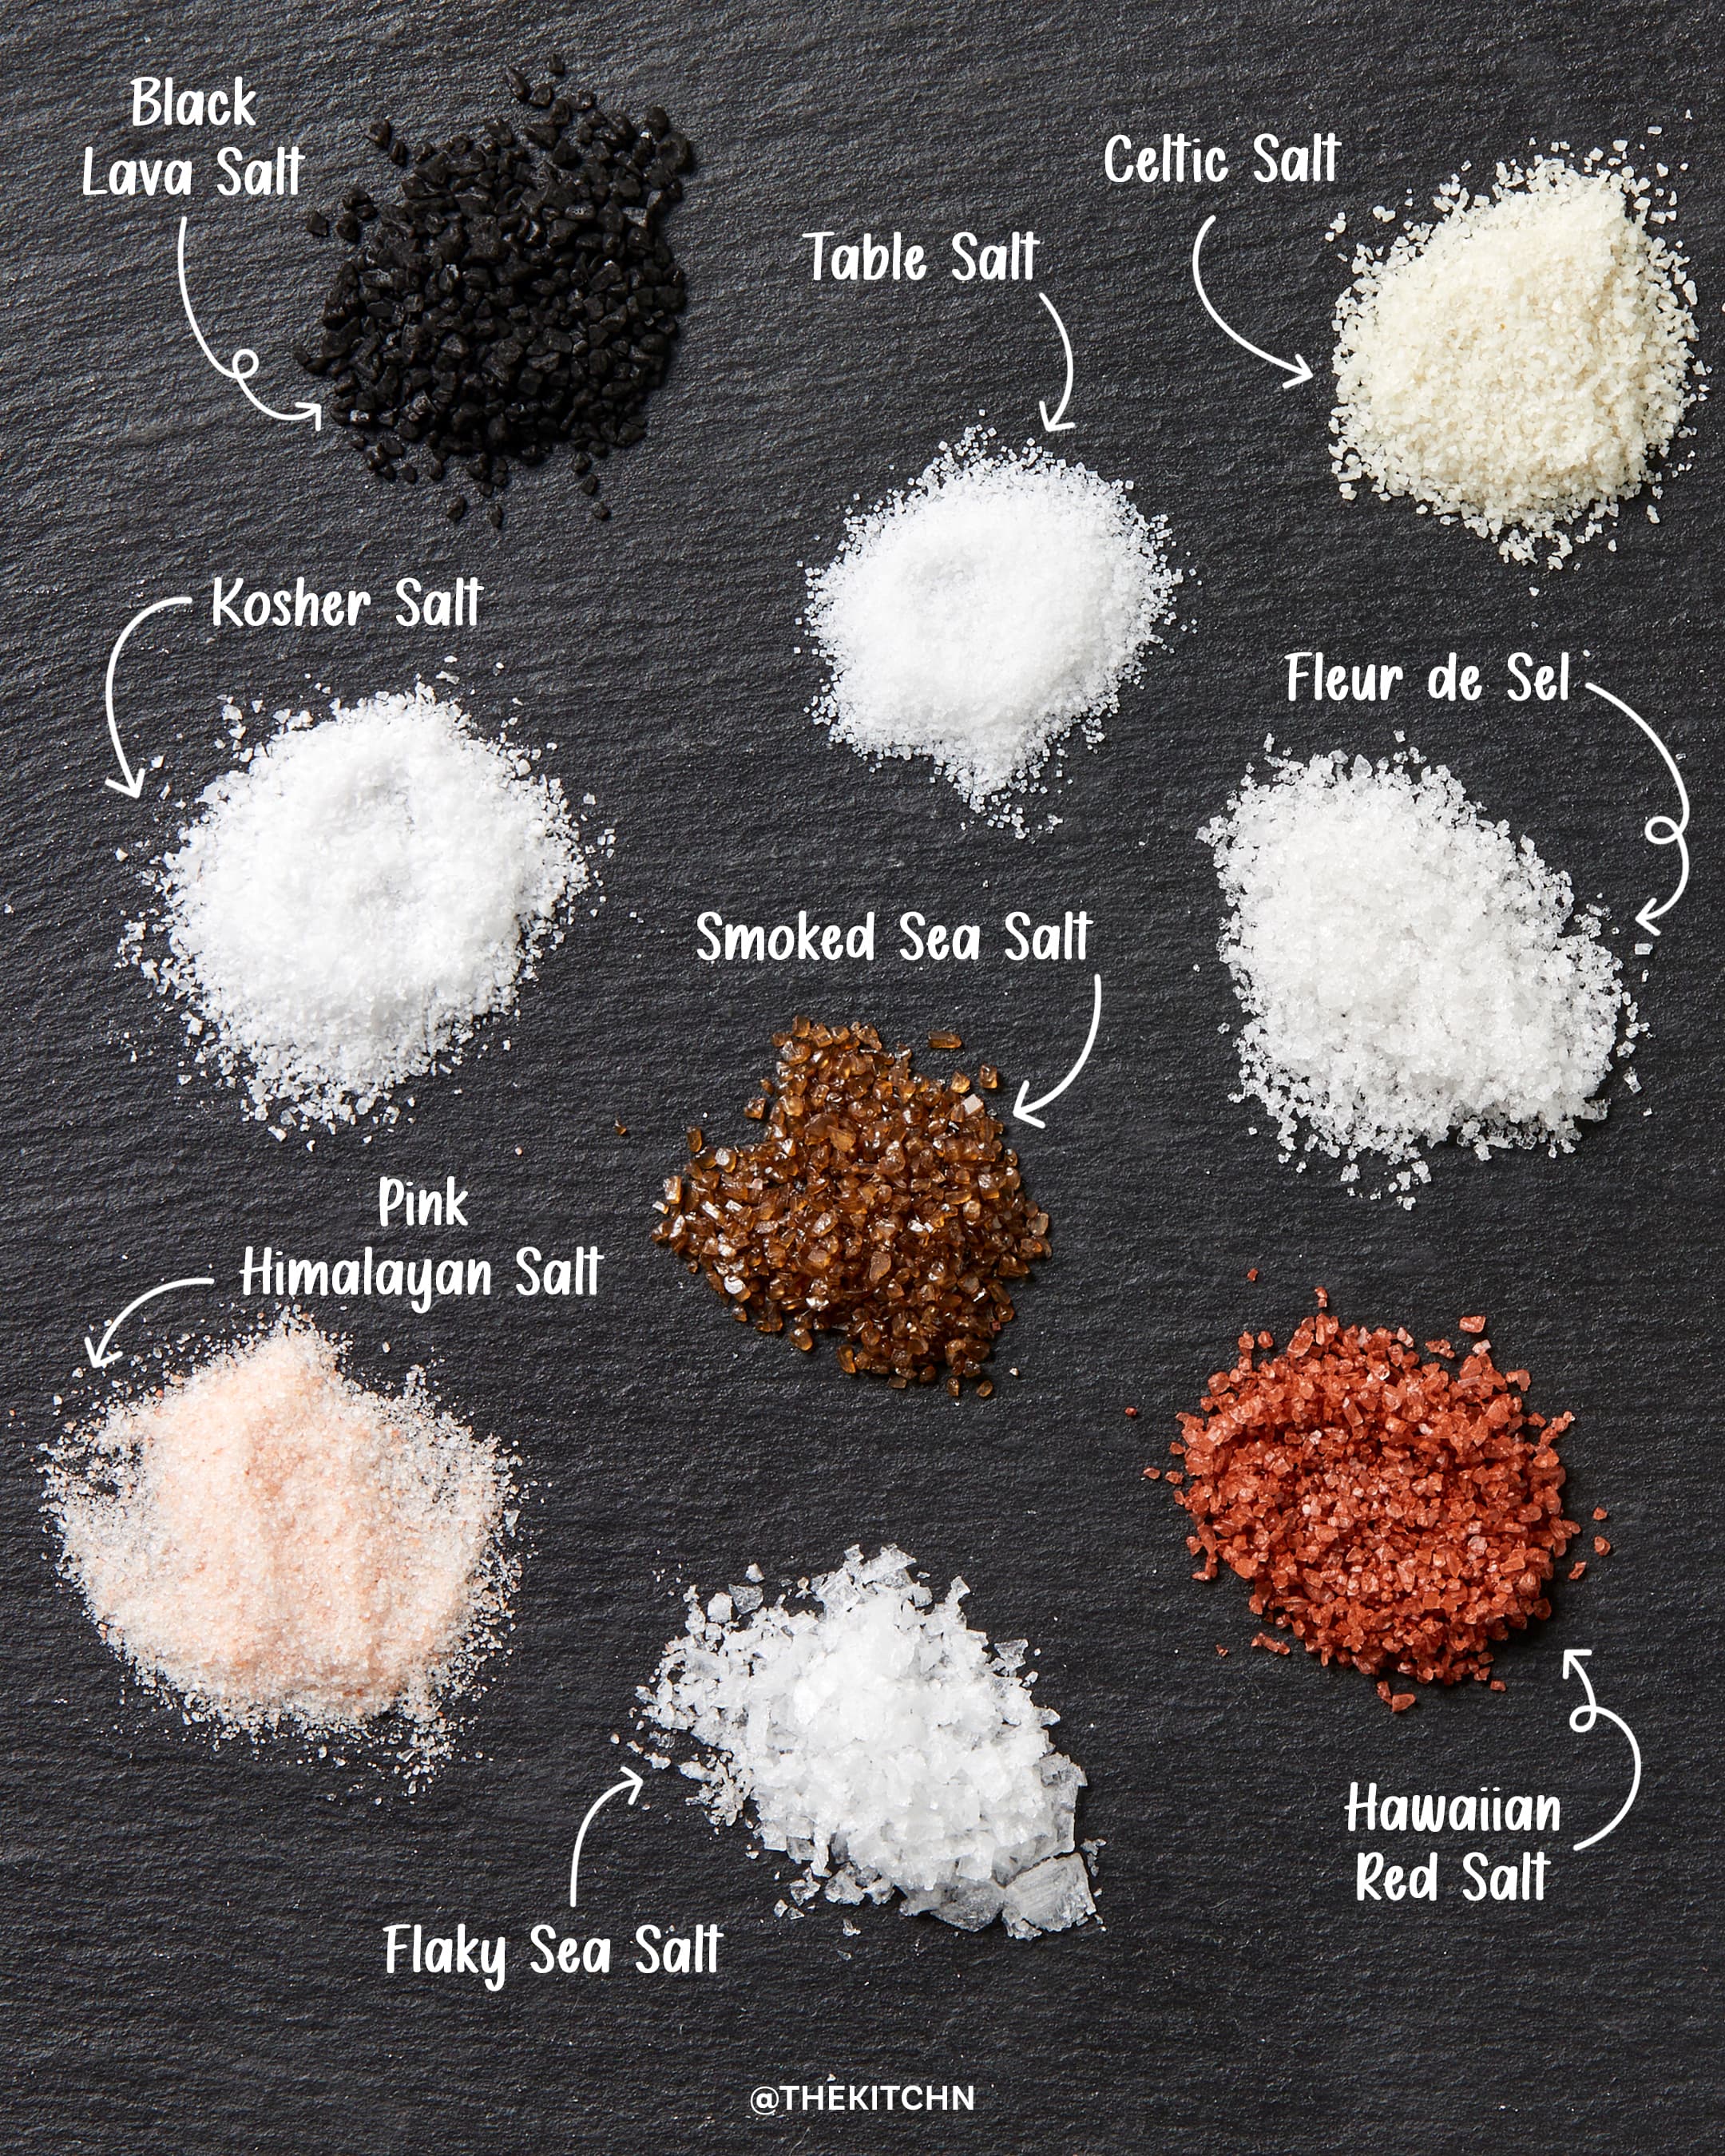 Celtic Sea Salt vs. Himalayan Sea Salt  Many of you have asked what the  differences are between Celtic Sea Salt and Himalayan Sea Salt. Here are  some of the most distinctive